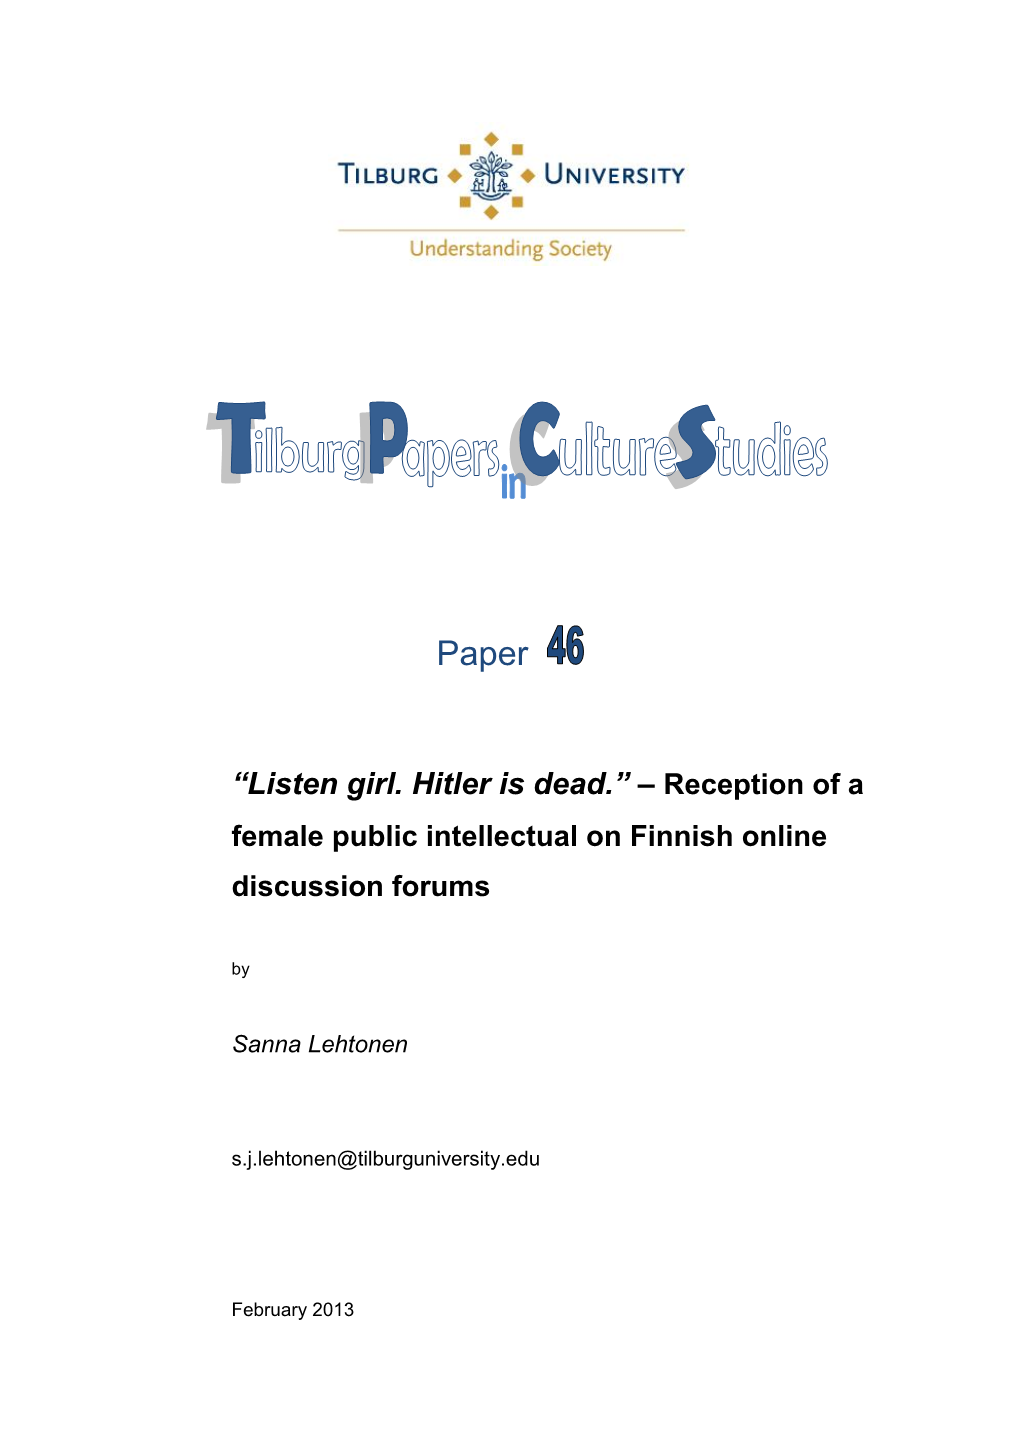 Reception of a Female Public Intellectual on Finnish Online Discussion Forums